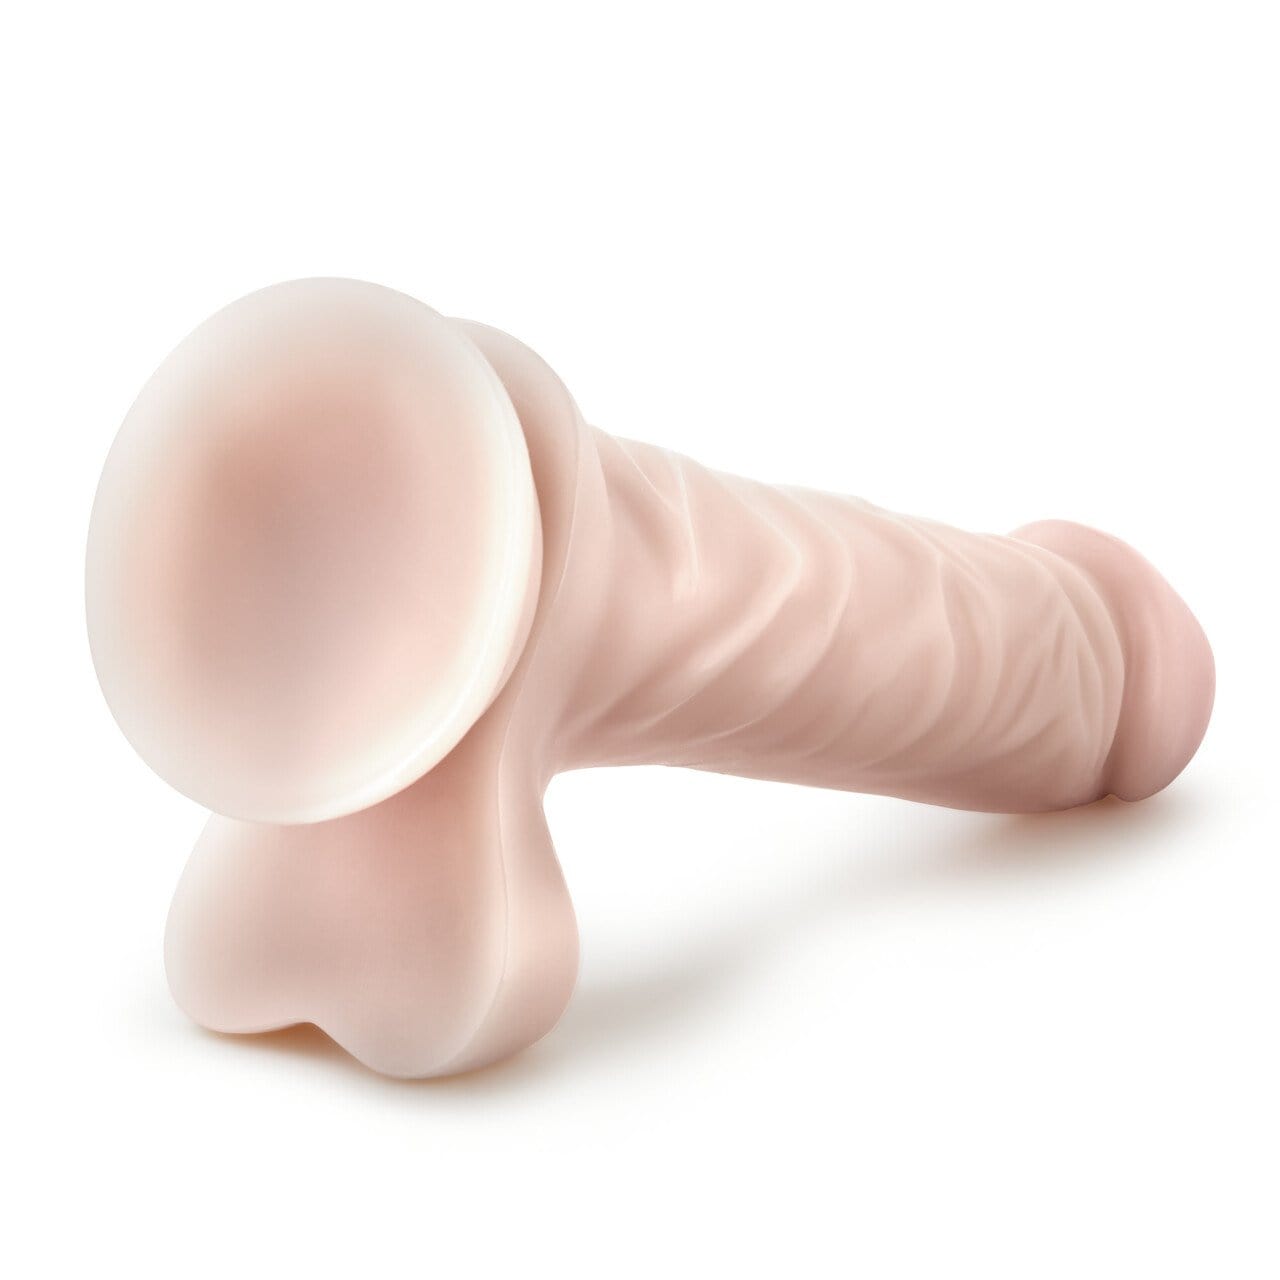 Dr. Skin Cock 1 9 Inch Dildo - Beige - Thorn & Feather Sex Toy Canada